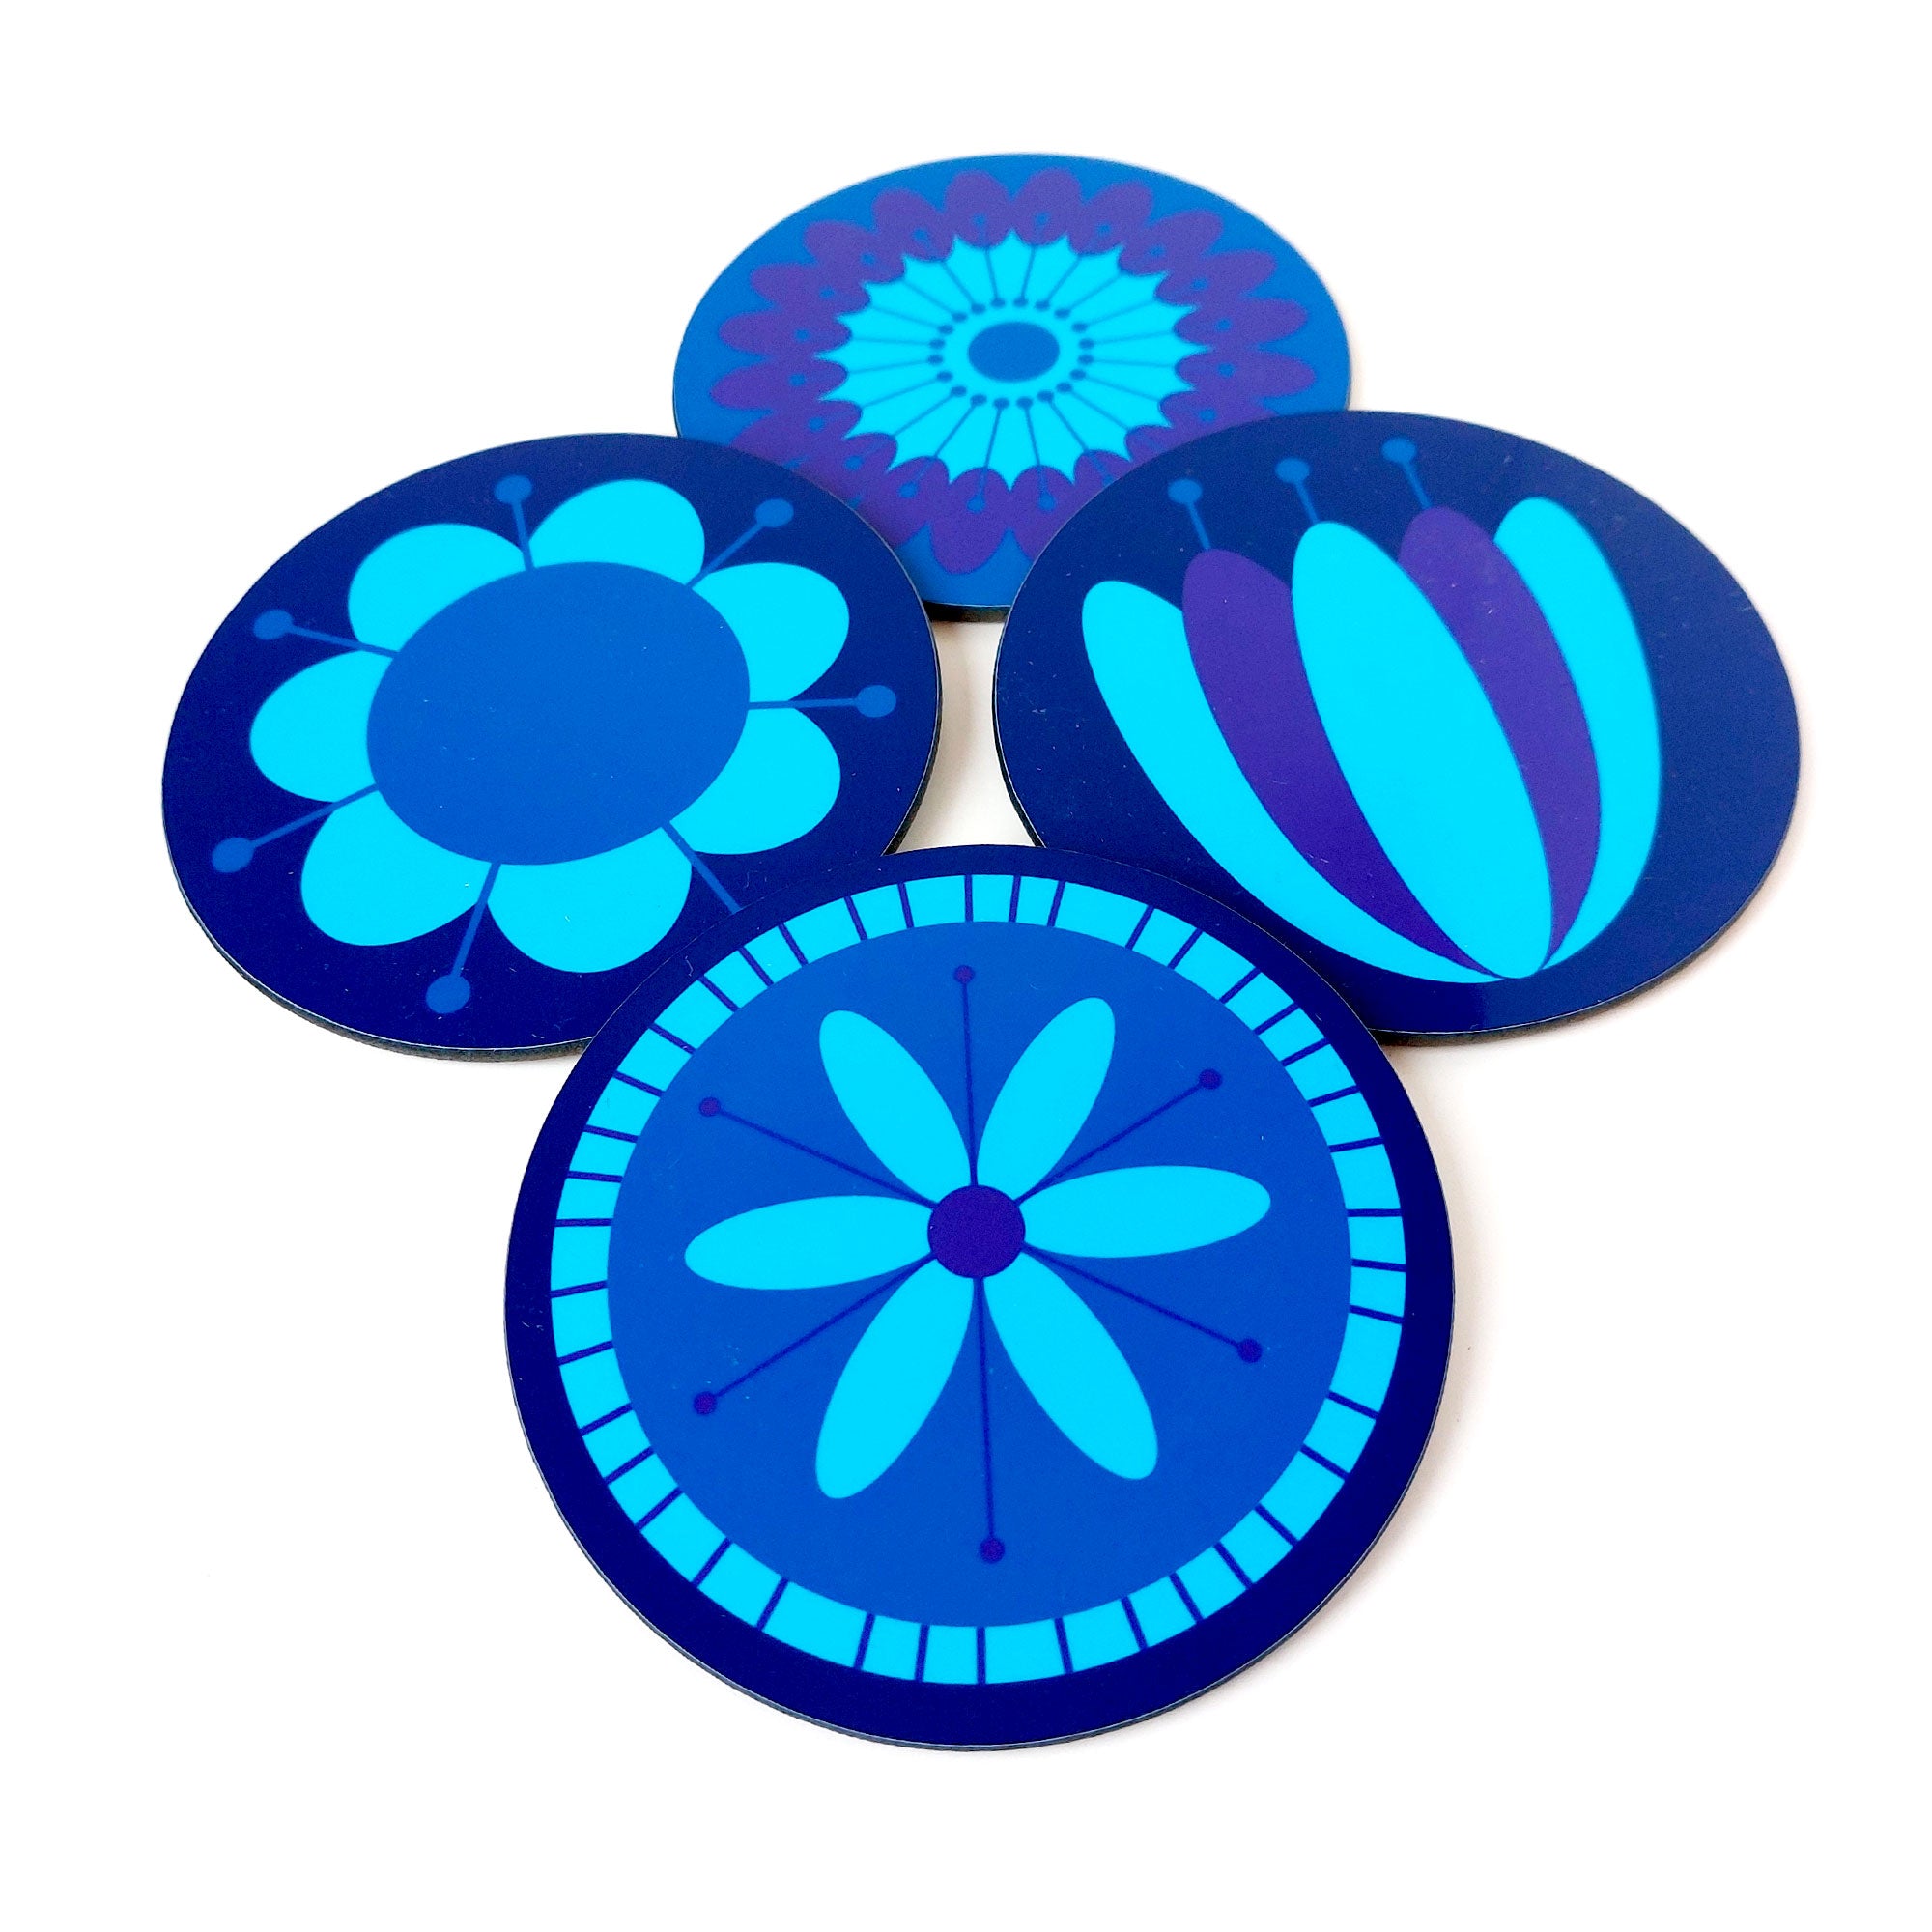 Four round coasters featuring retro 70s style flowers in blues & purples lie on a white table | The Inkabilly Emporium